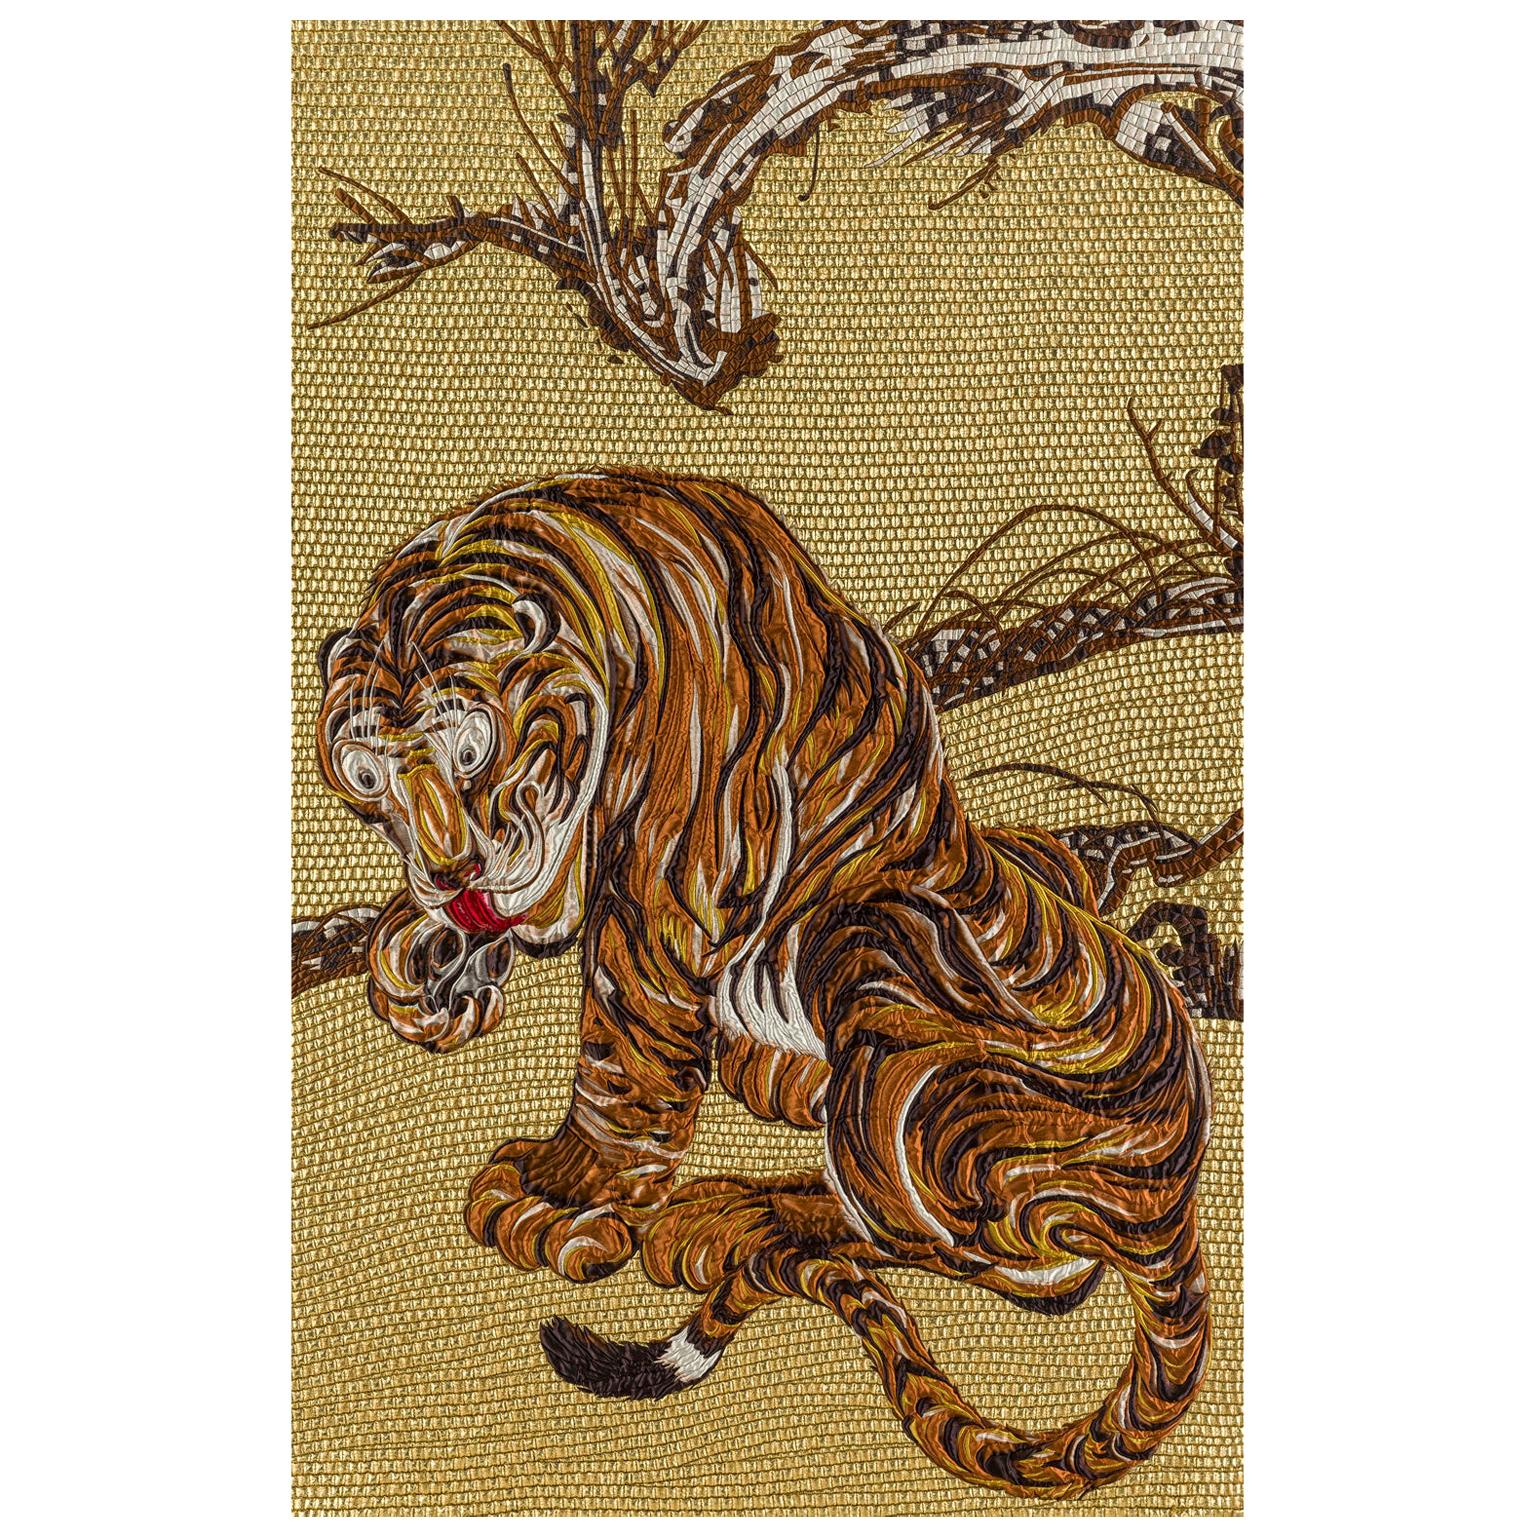 Fabric Tapestry with Tiger Design Upholstered Panel on Demand